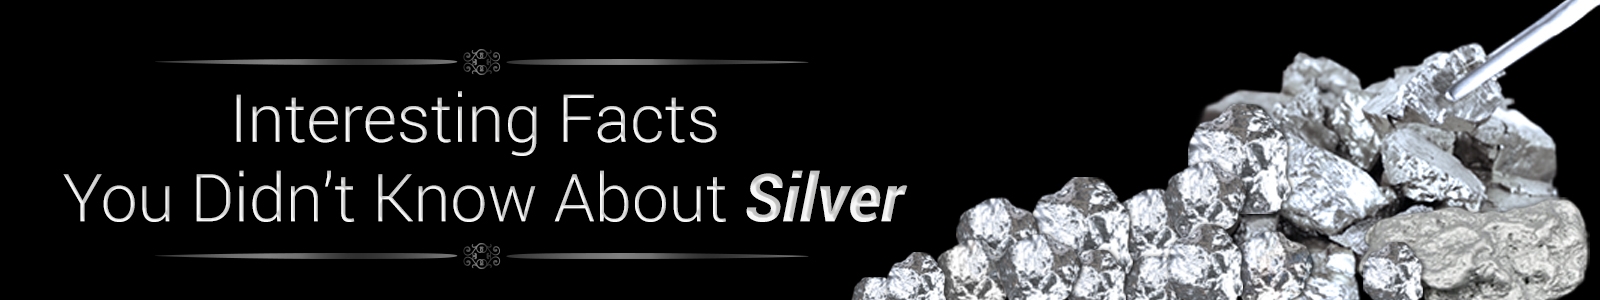 Interesting Facts You Didn’t Know About Silver